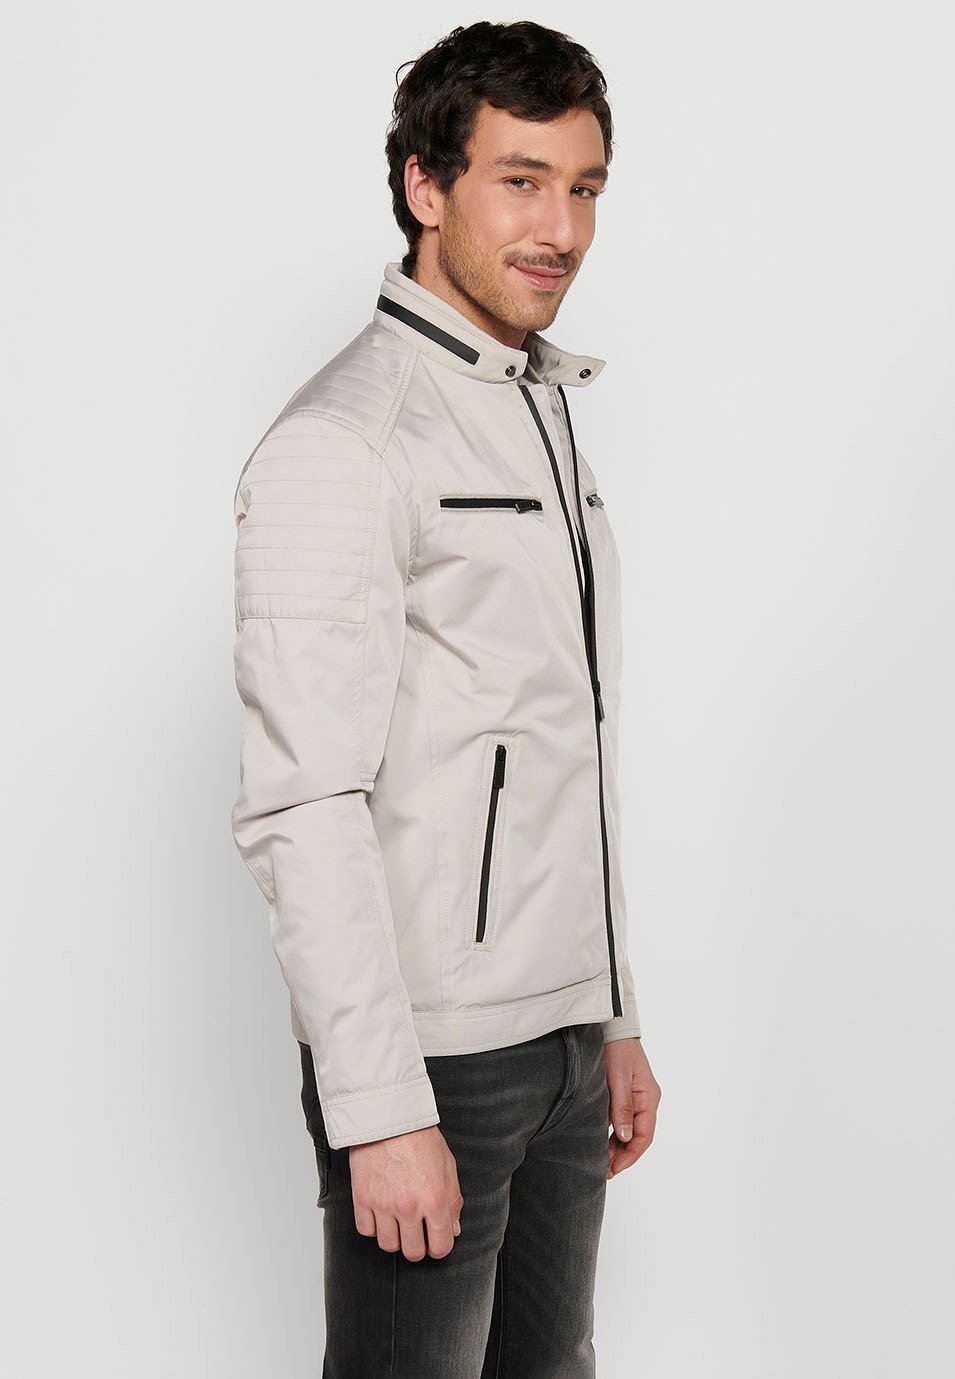 Beige Long-sleeved Jacket with Round Neck and Front Zipper Closure for Men 7